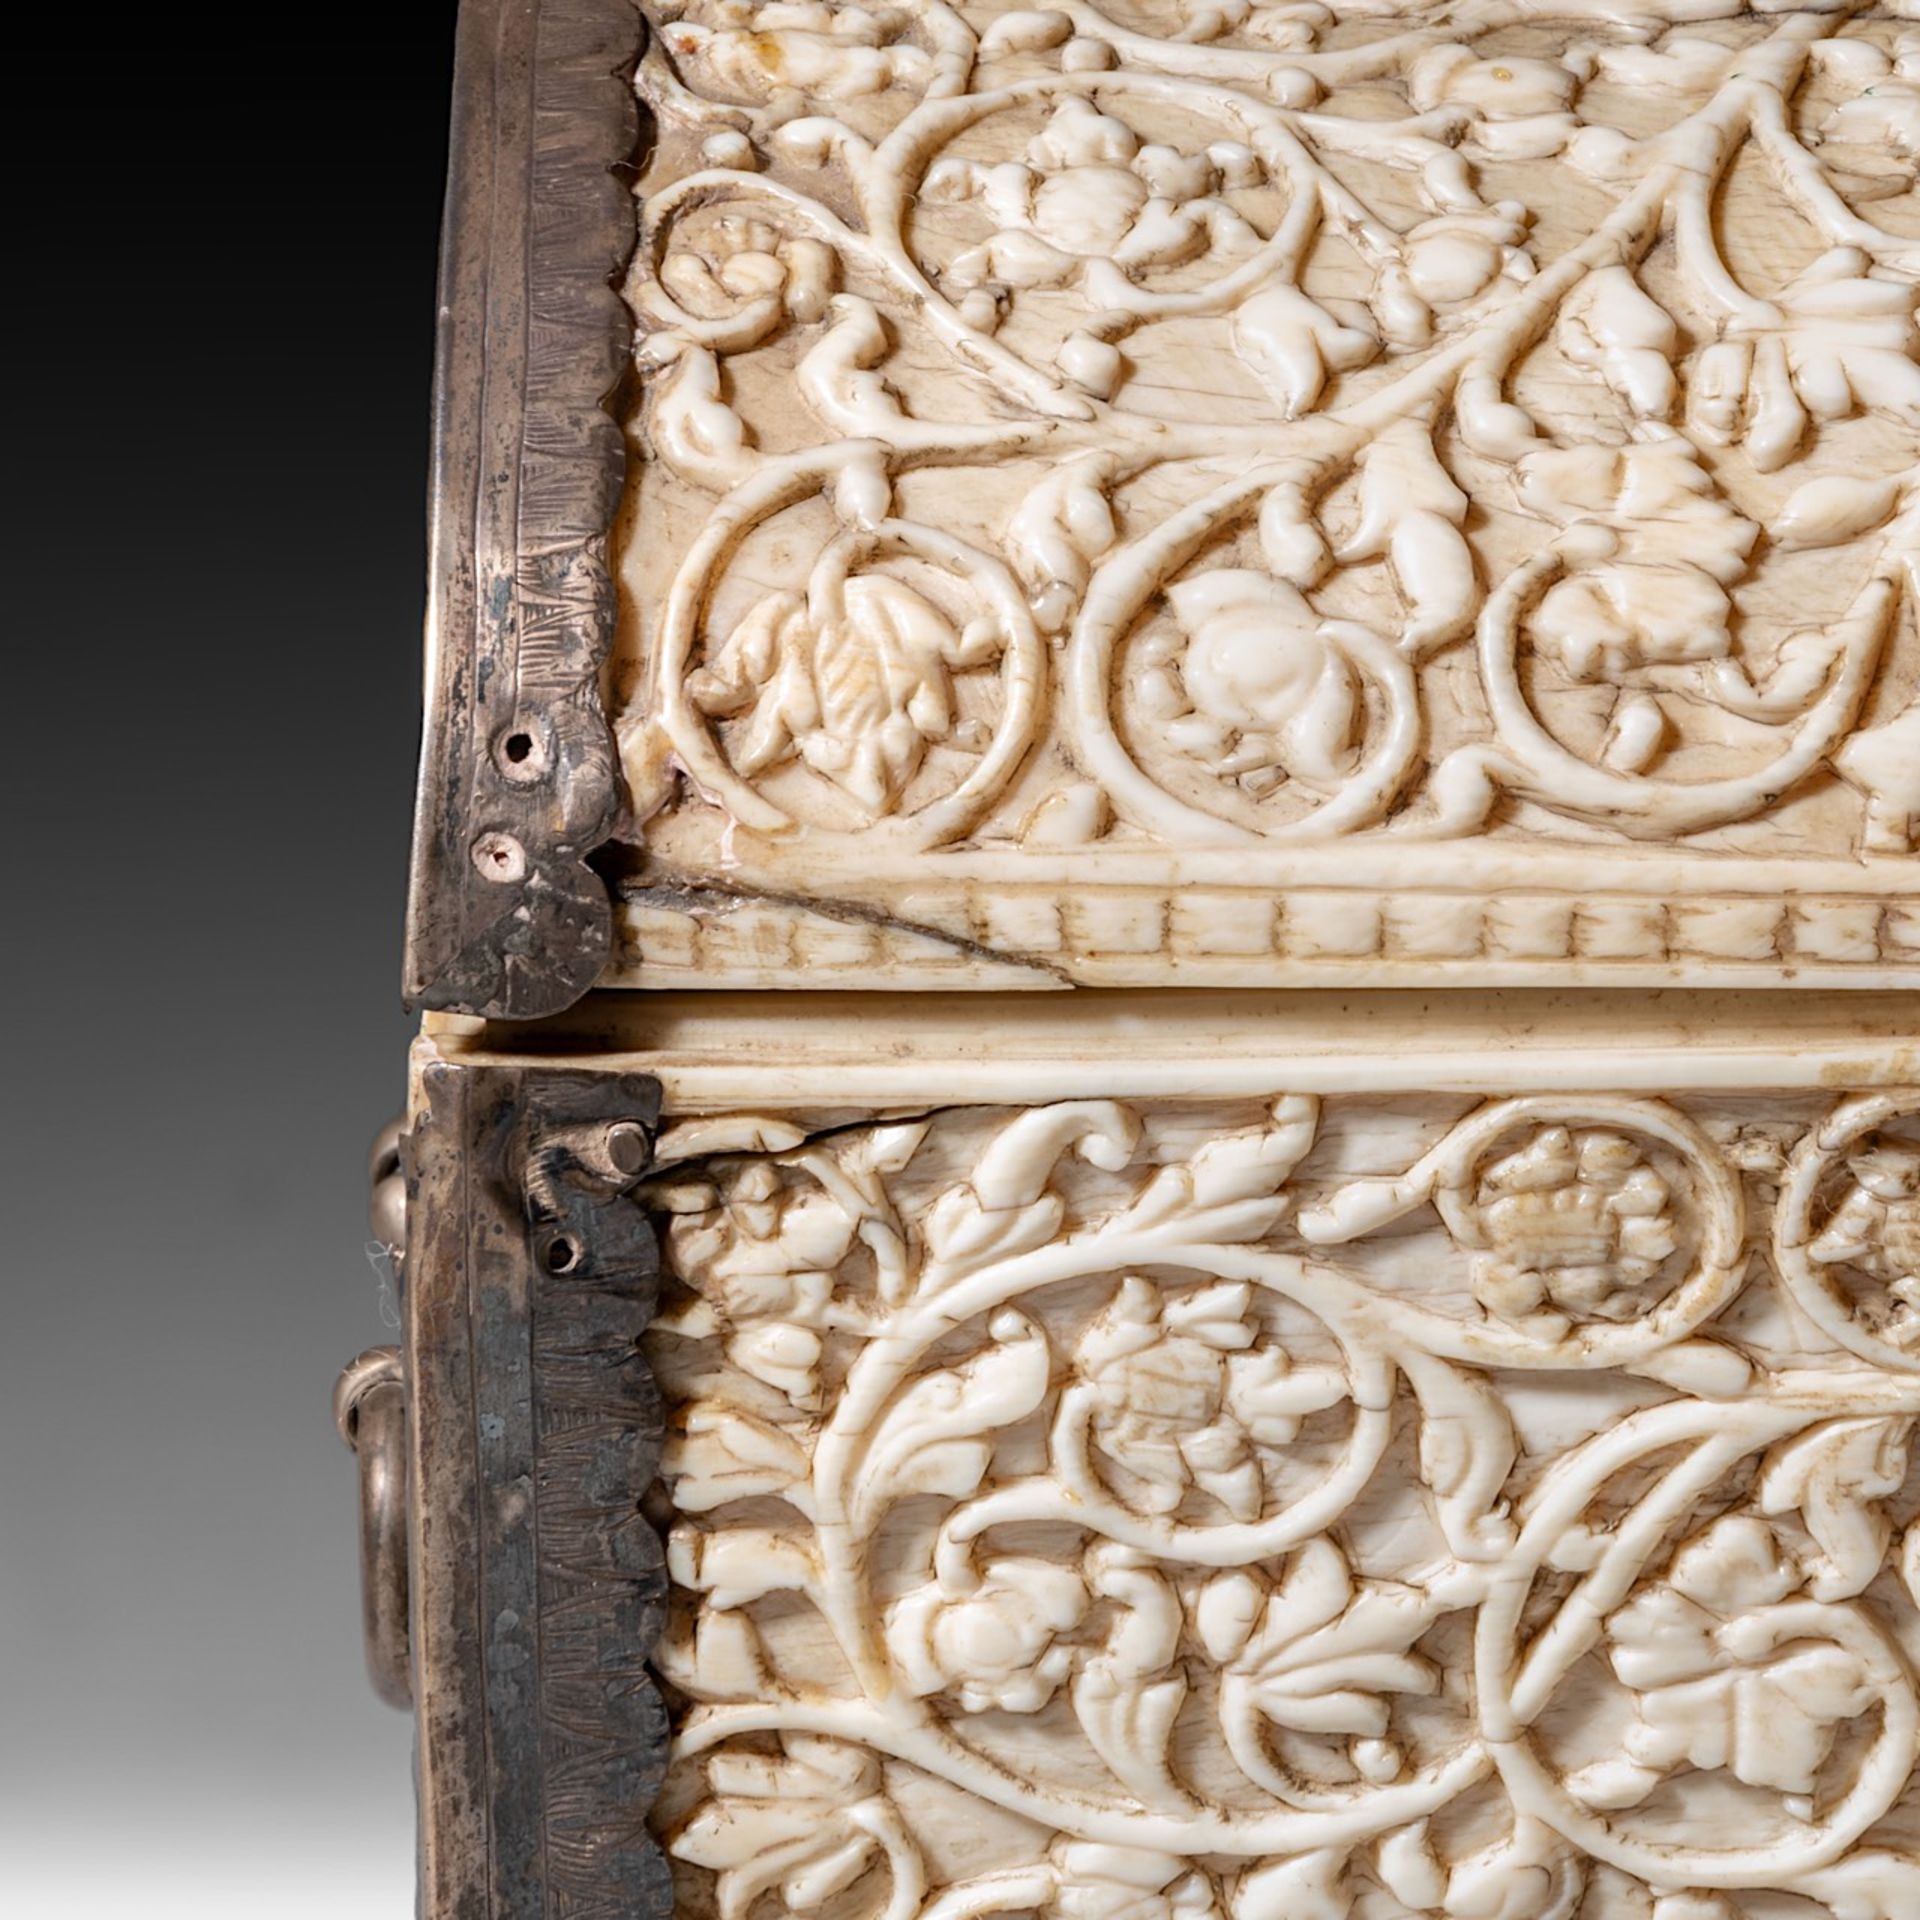 A 17th/18th-century Sinhalese (Sri Lanka) ivory jewelry casket, H 13,5 - W 19,3 - D 10,1 cm / total - Image 11 of 11